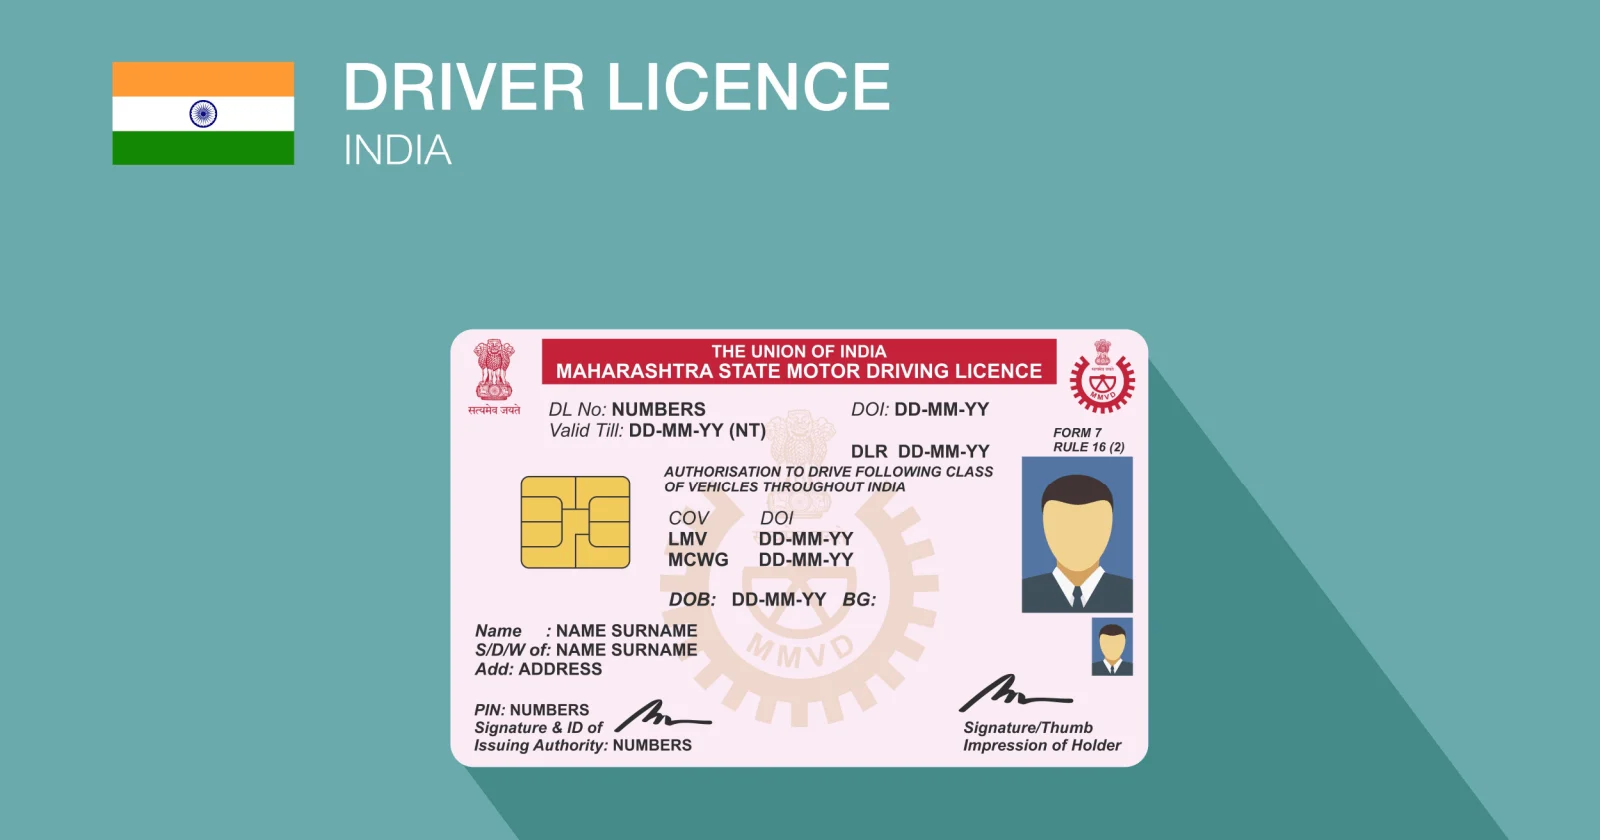 How to Check Driving Licence (DL) Status